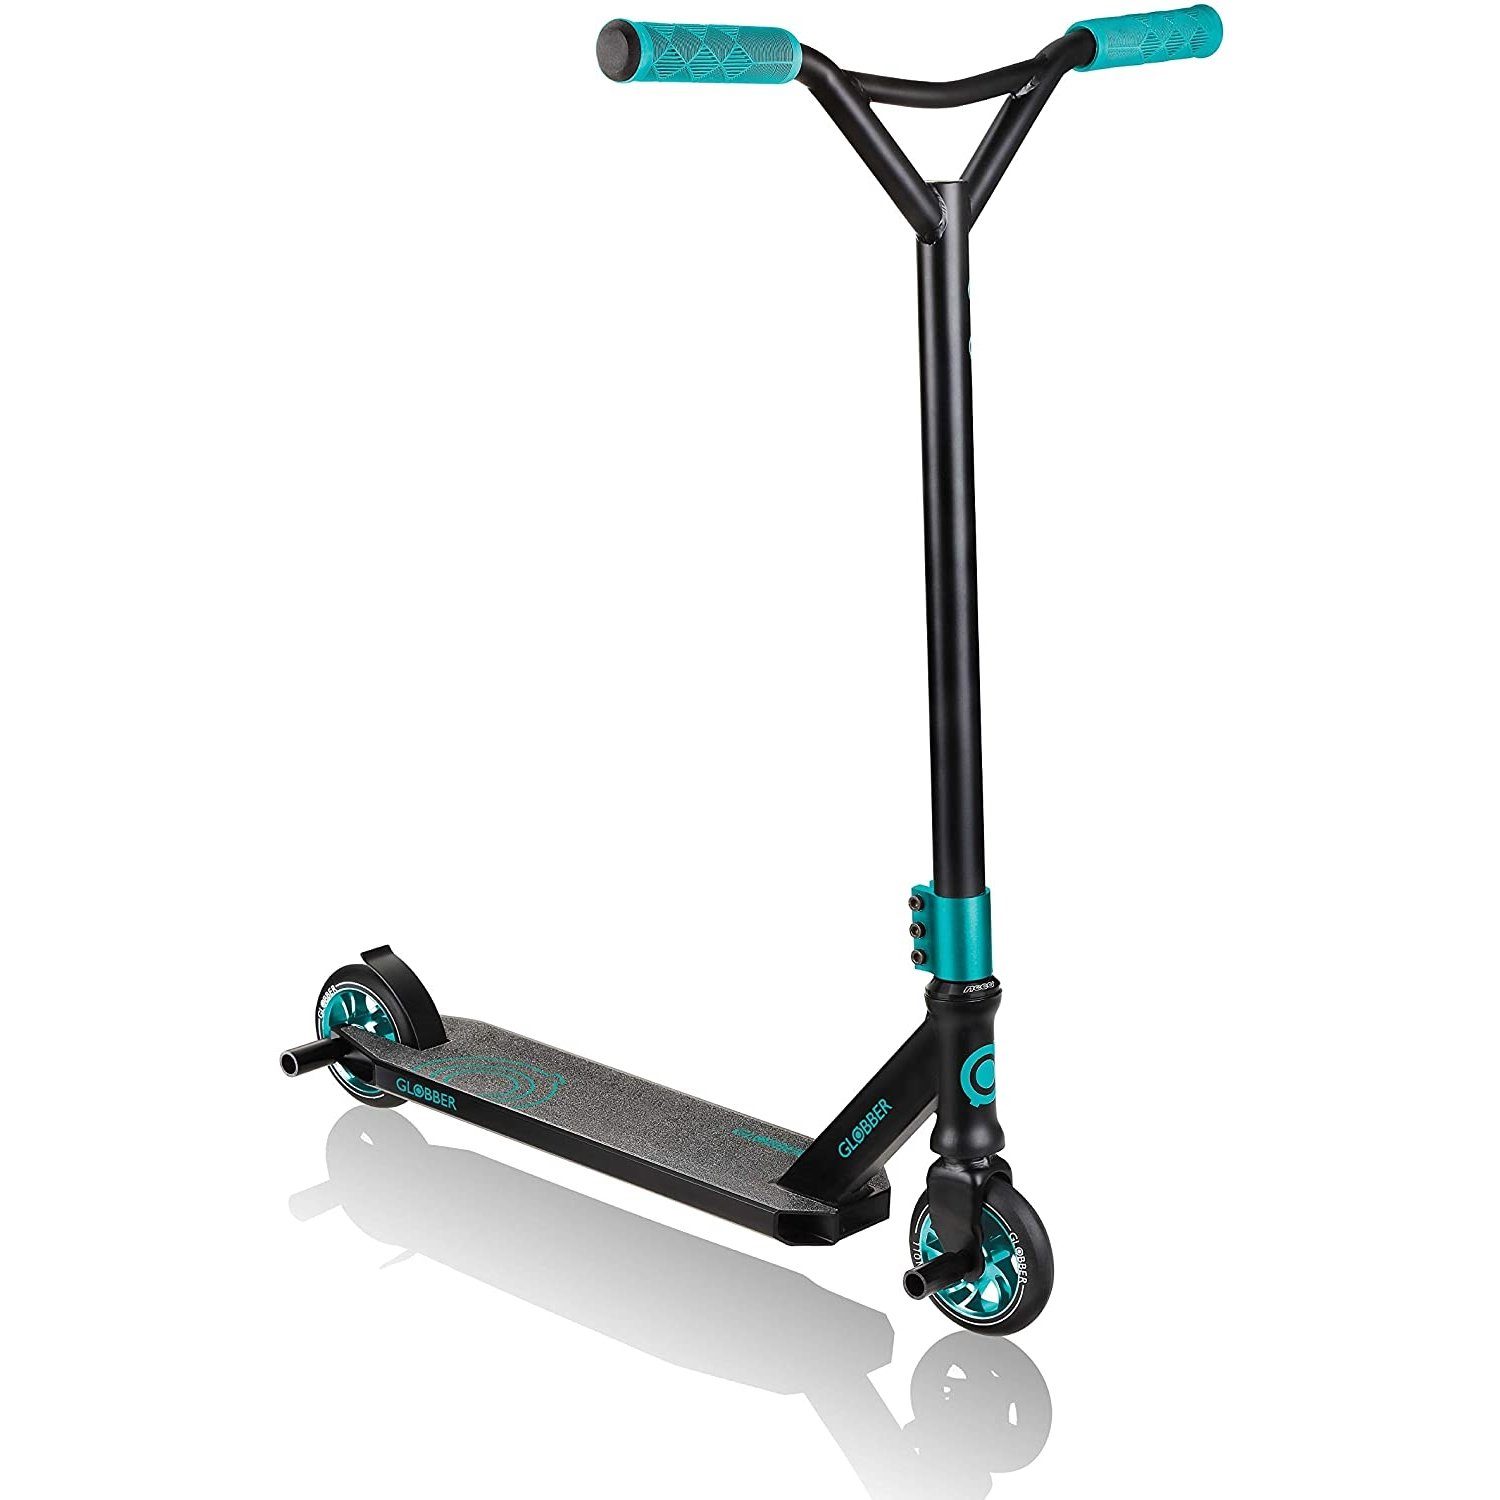 624-009-2 toys Scooter 720 GS & Stuntscooter Globber sports authentic schwarz-teal Türkis